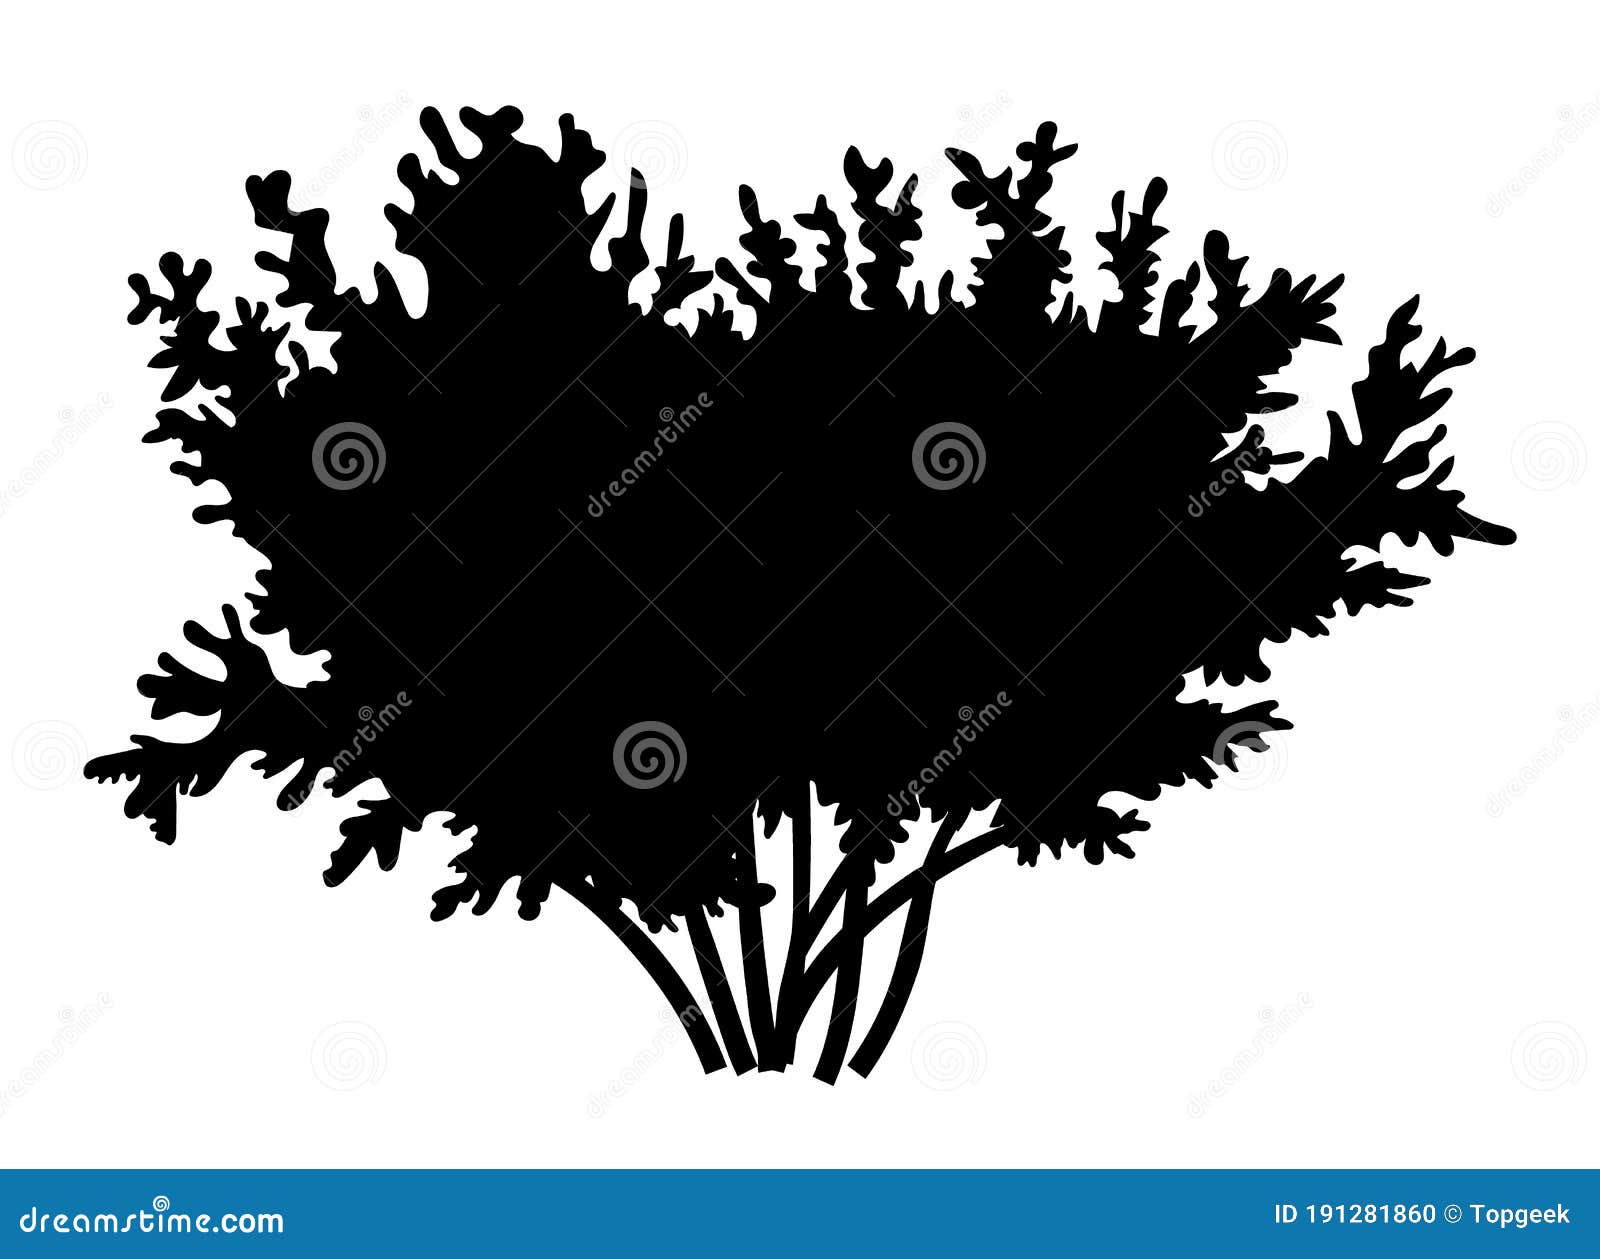 Silhouette Bush With Leaves Isilated On White Background Lush Bush Several Thick Branche Wide